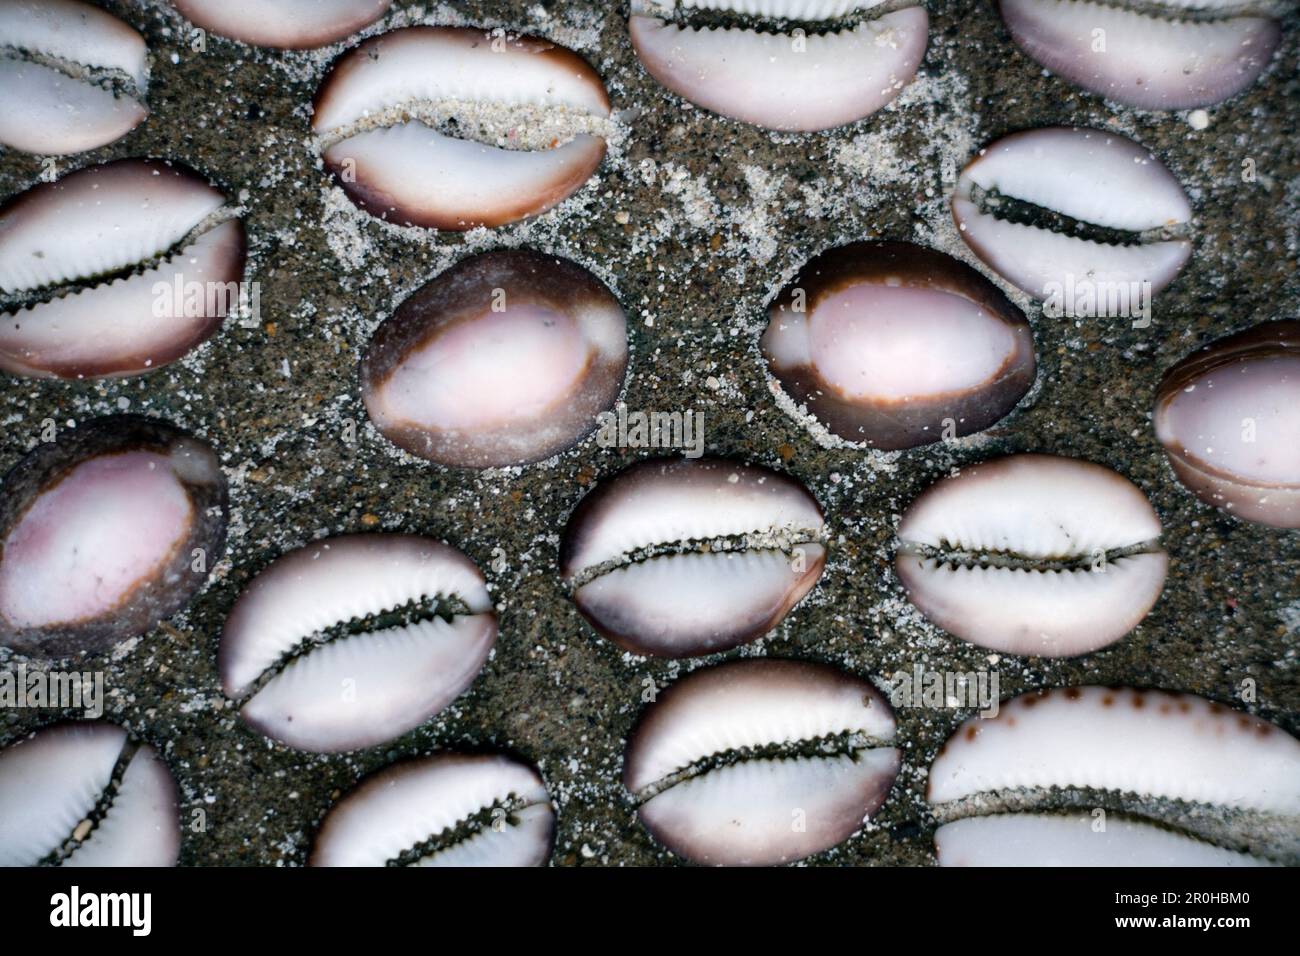 INDONESIA, Mentawai Islands, close-up of Cowrie Shells Stock Photo